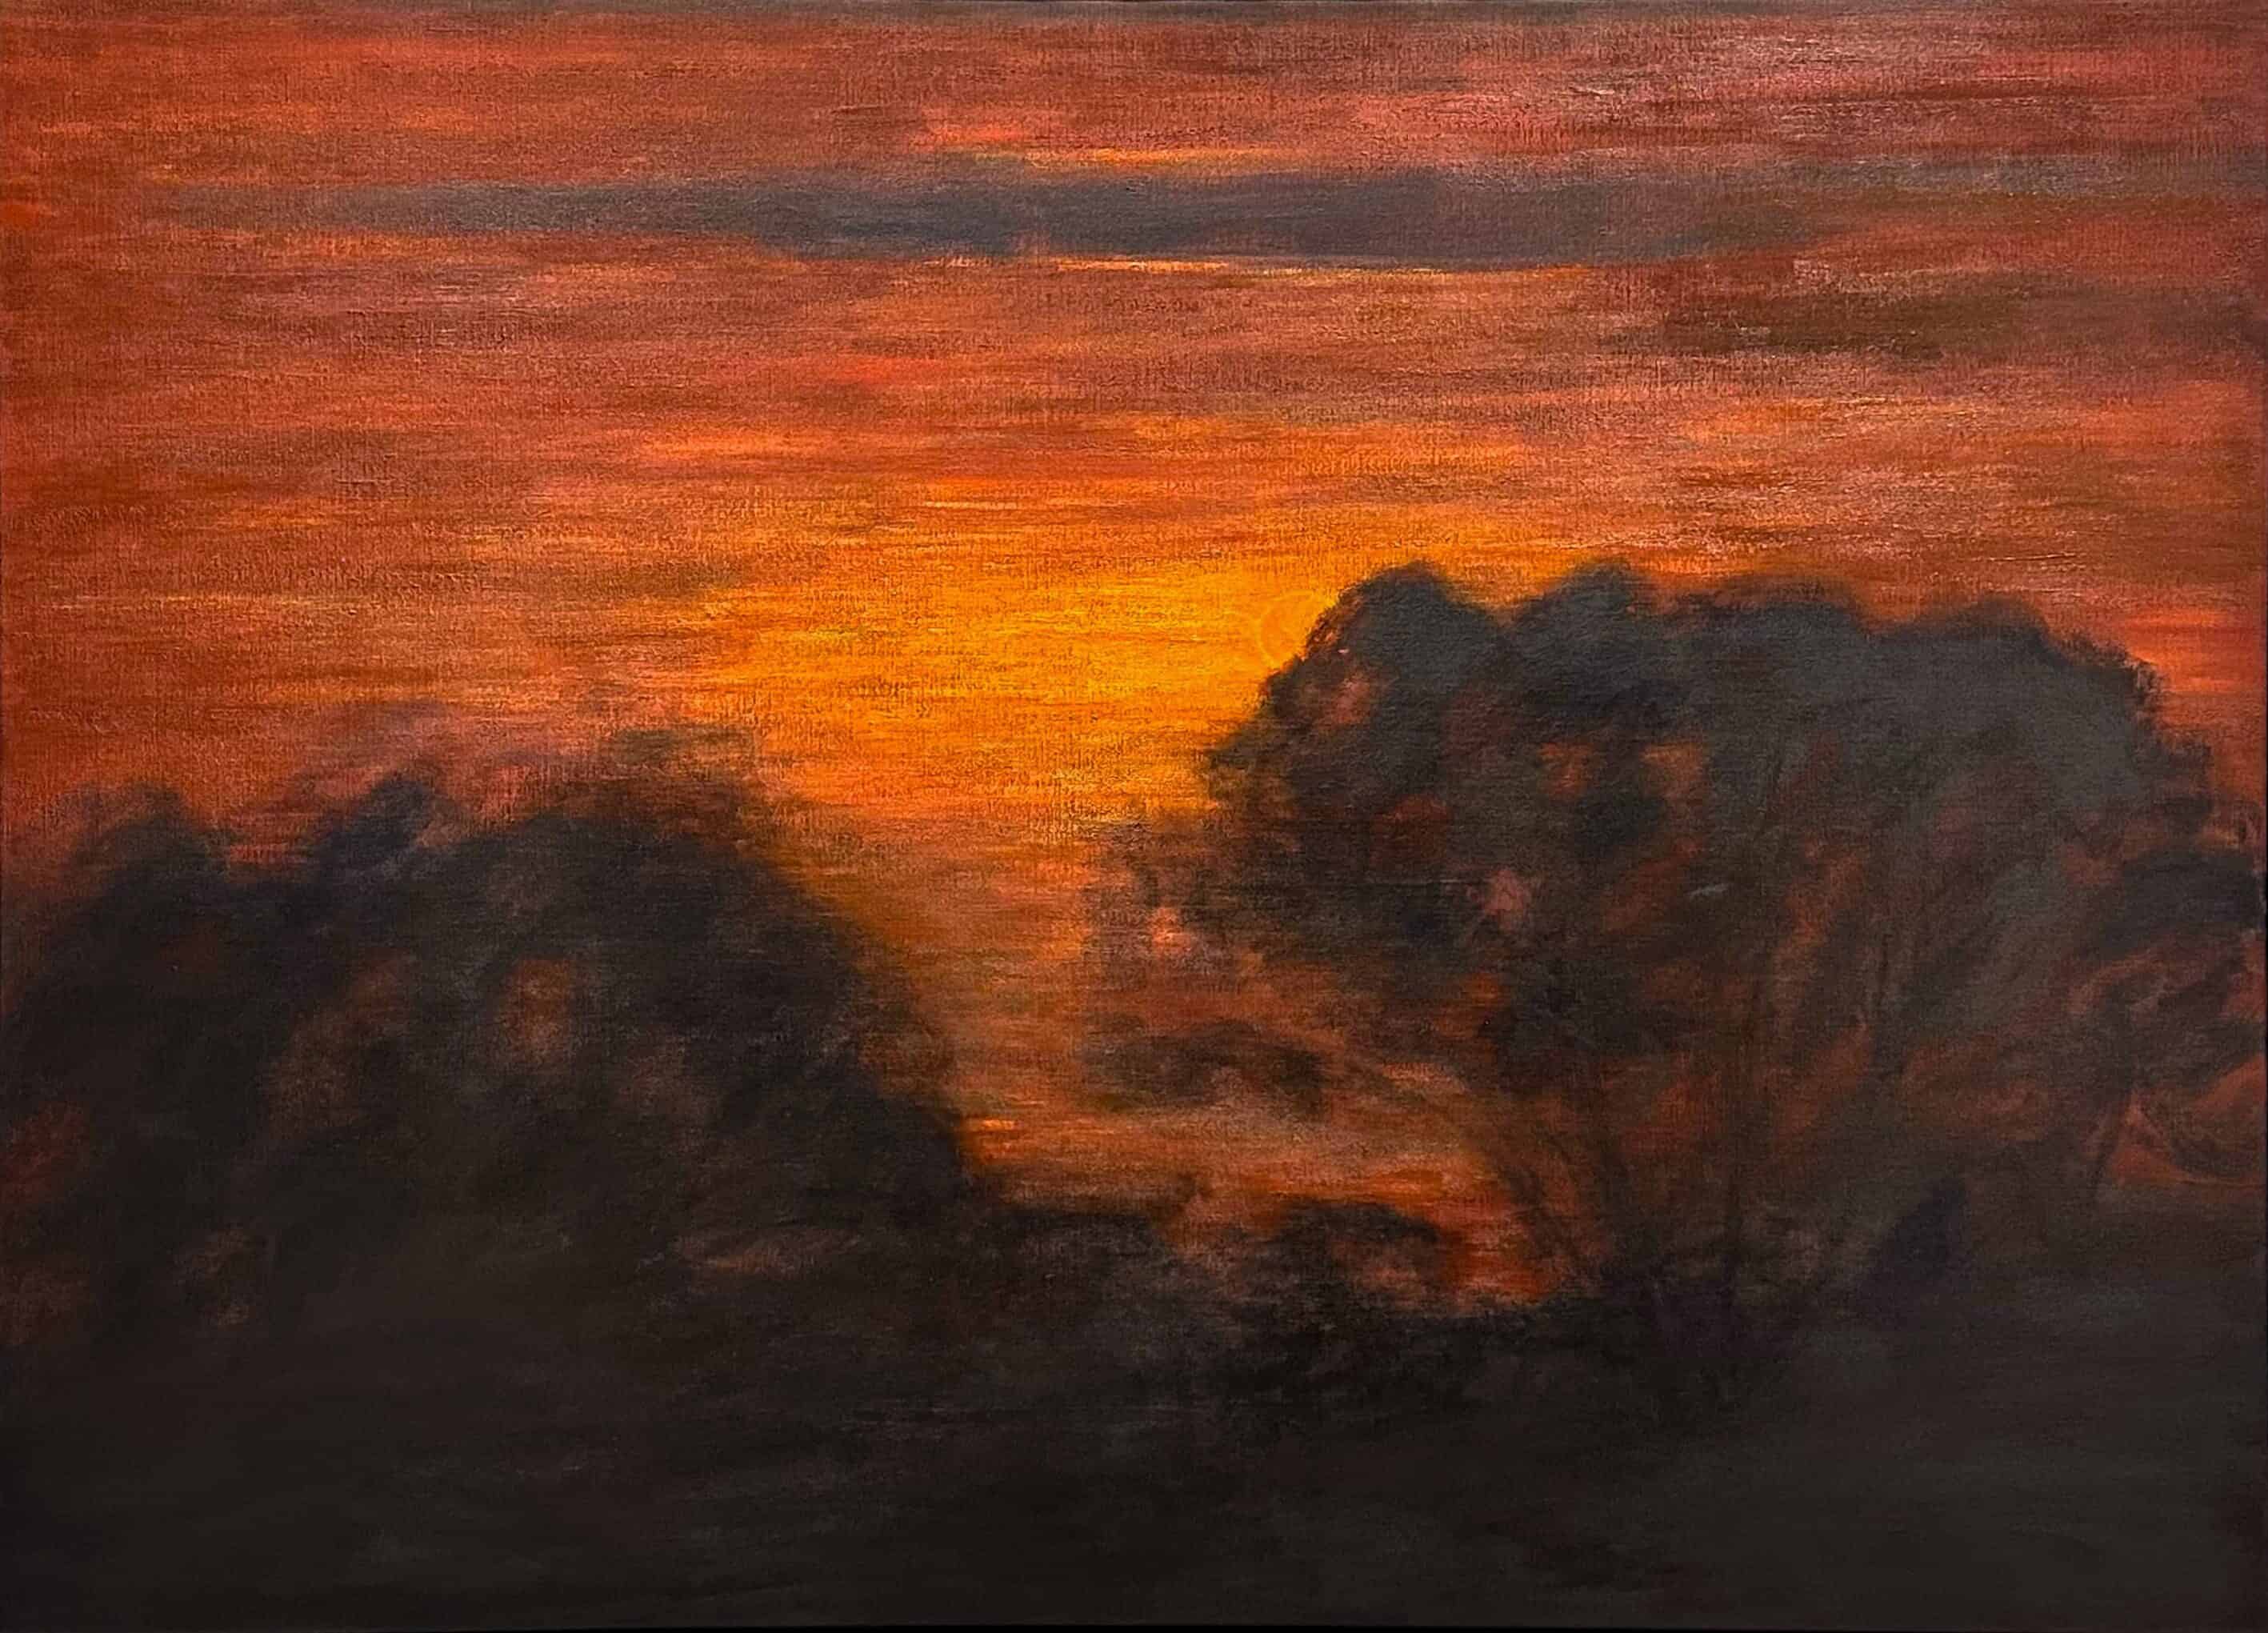 Contemporary art. Title: Slated Silhouettes Red Sky, Oil on Canvas, 43.5 x 60 in by Canadian artist Paul Chizik.